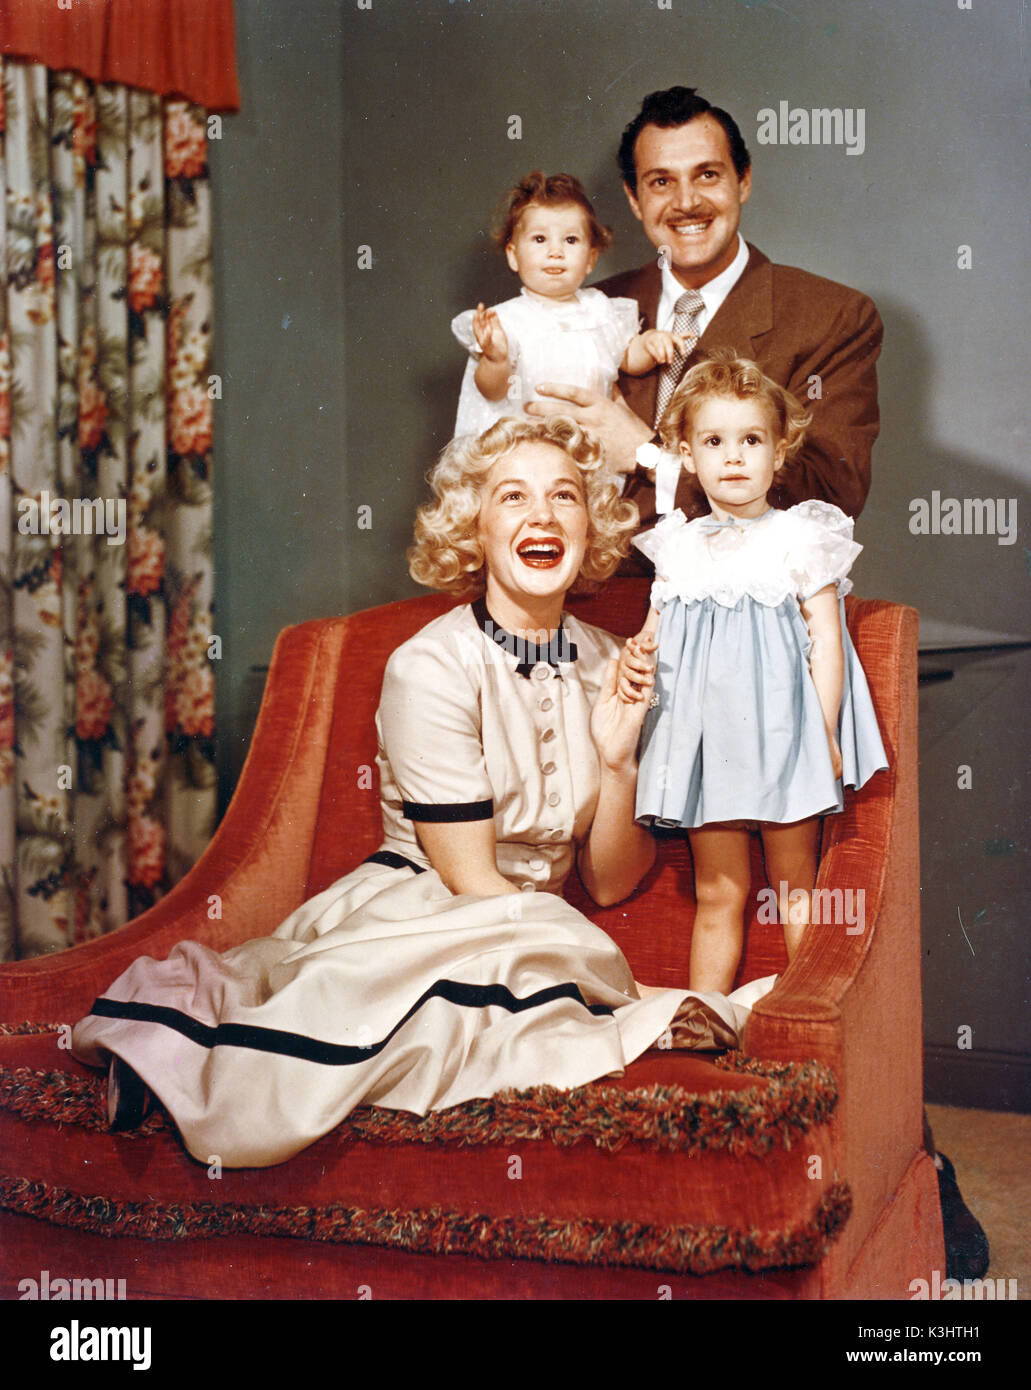 AMERICAN ACTRESS BETTY HUTTON IN THE LATE 1940s WITH HER CHILDREN AND HUSBAND TED BRISKIN BETTY HUTTON  American Actress IN THE LATE 1940s WITH HER CHILDREN AND HUSBAND TED BRISKIN Stock Photo